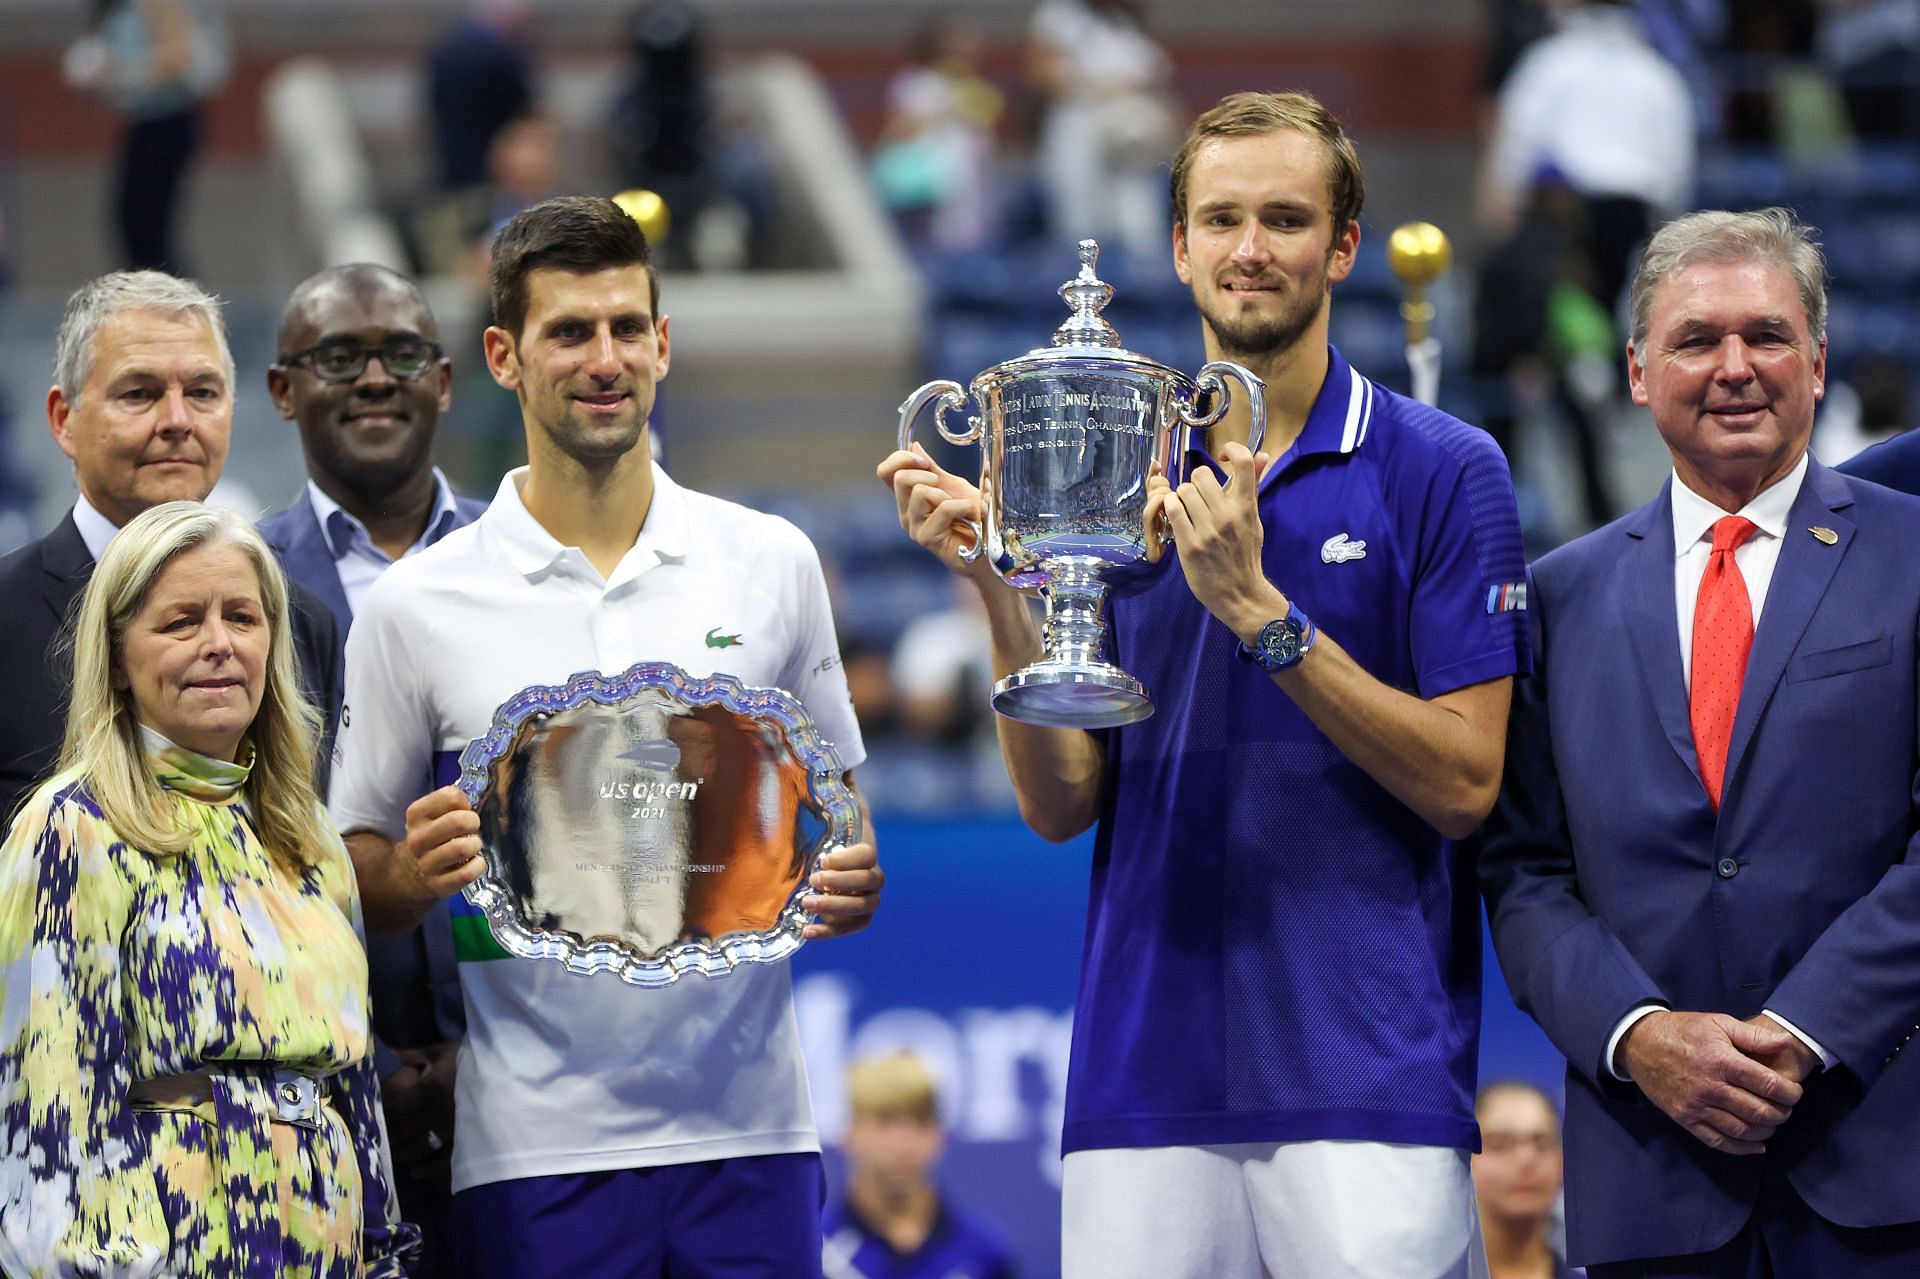 Novak Djokovic and Daniil Medvedev with their respective 2021 US Open titles